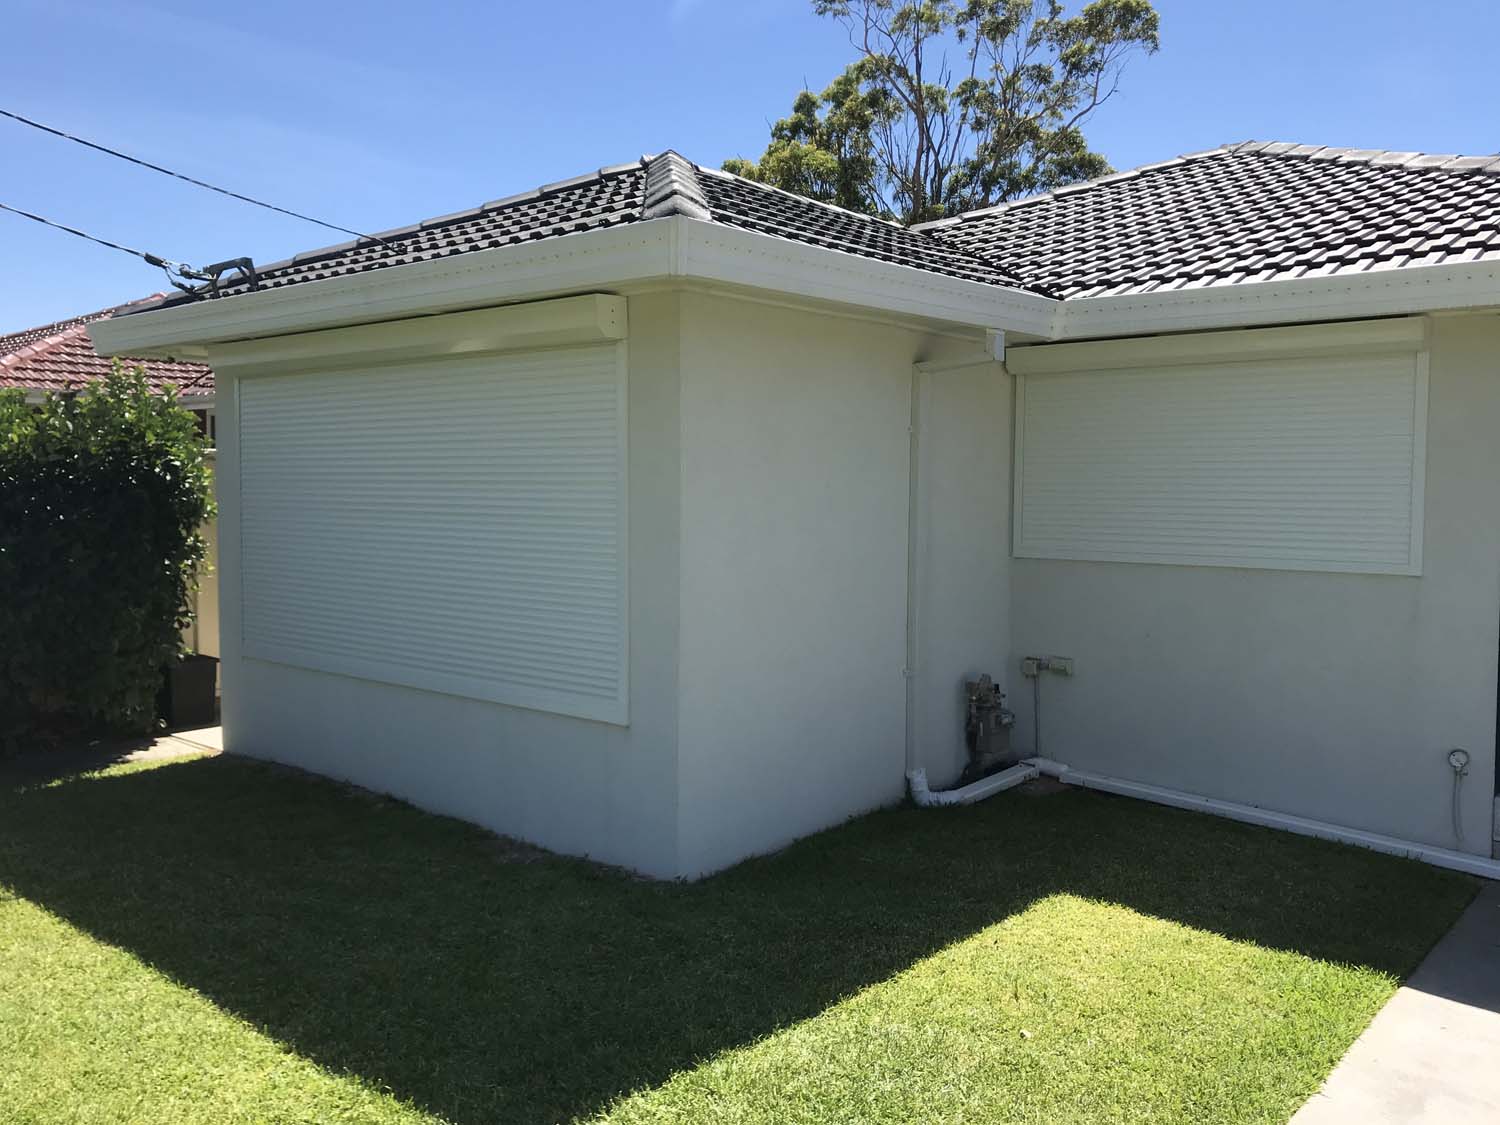 Are Roller Shutters Good for Security?